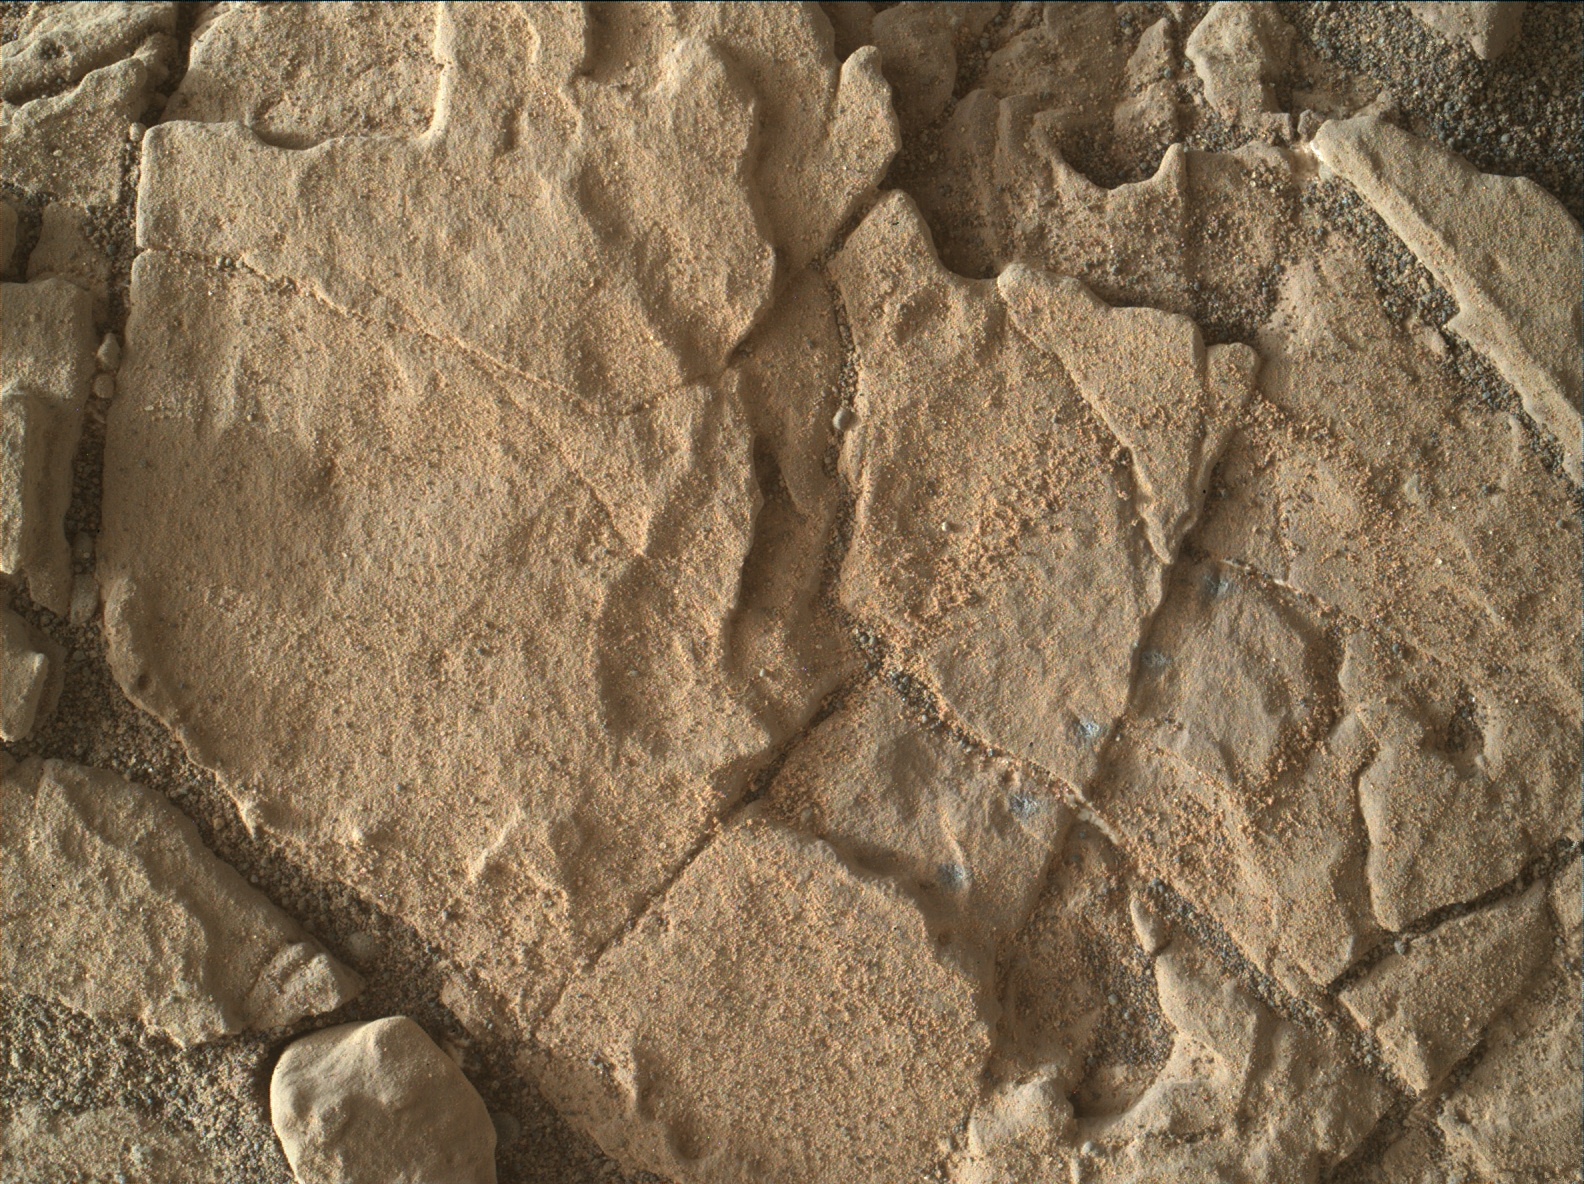 Nasa's Mars rover Curiosity acquired this image using its Mars Hand Lens Imager (MAHLI) on Sol 1942